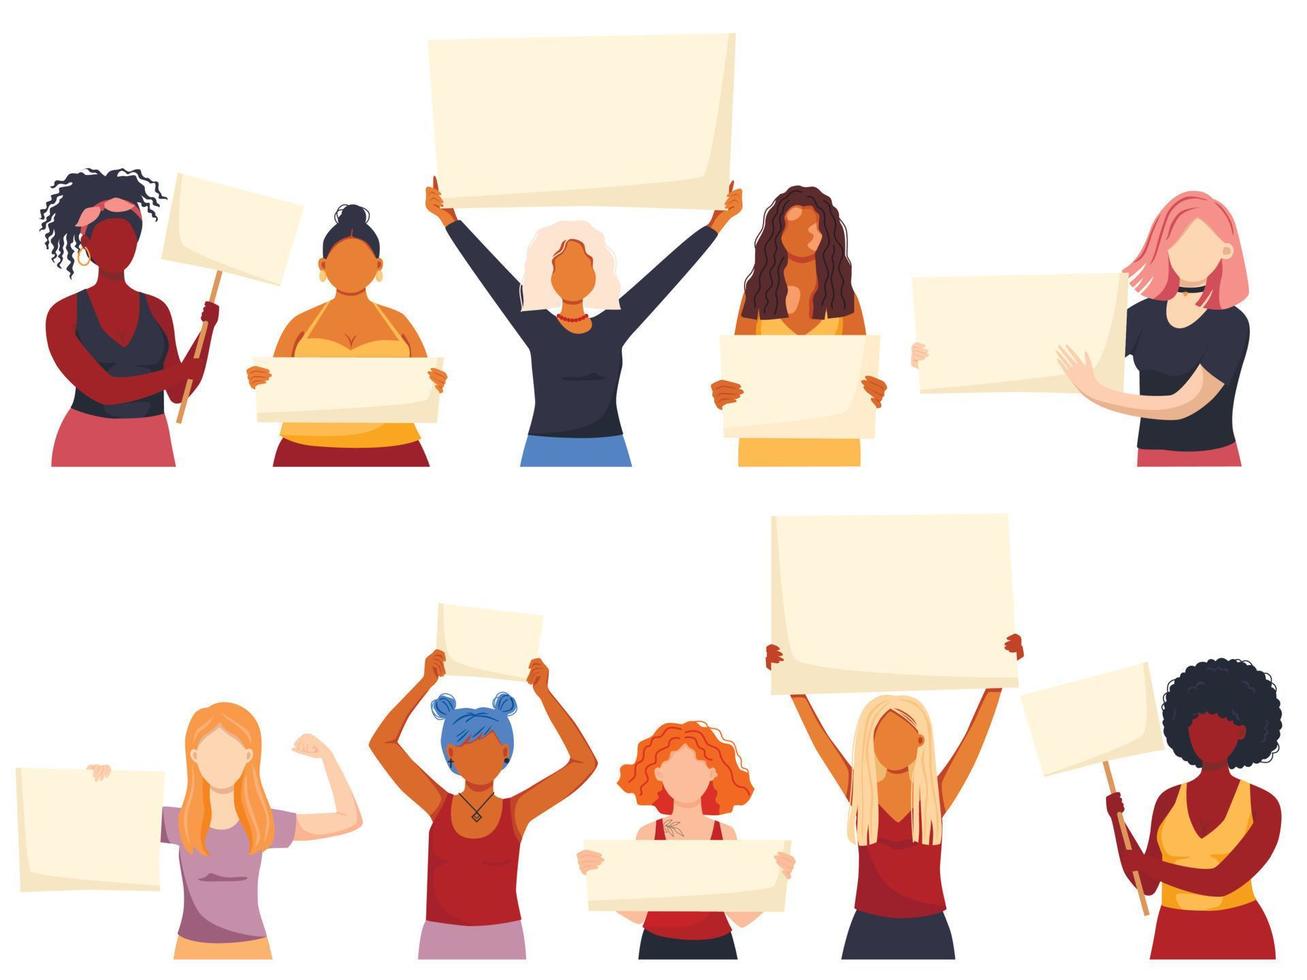 Set of vector illustration of women holding signs or placard on a protest demostration or picket. Woman against violence, pollution, descrimination, human rights violation.